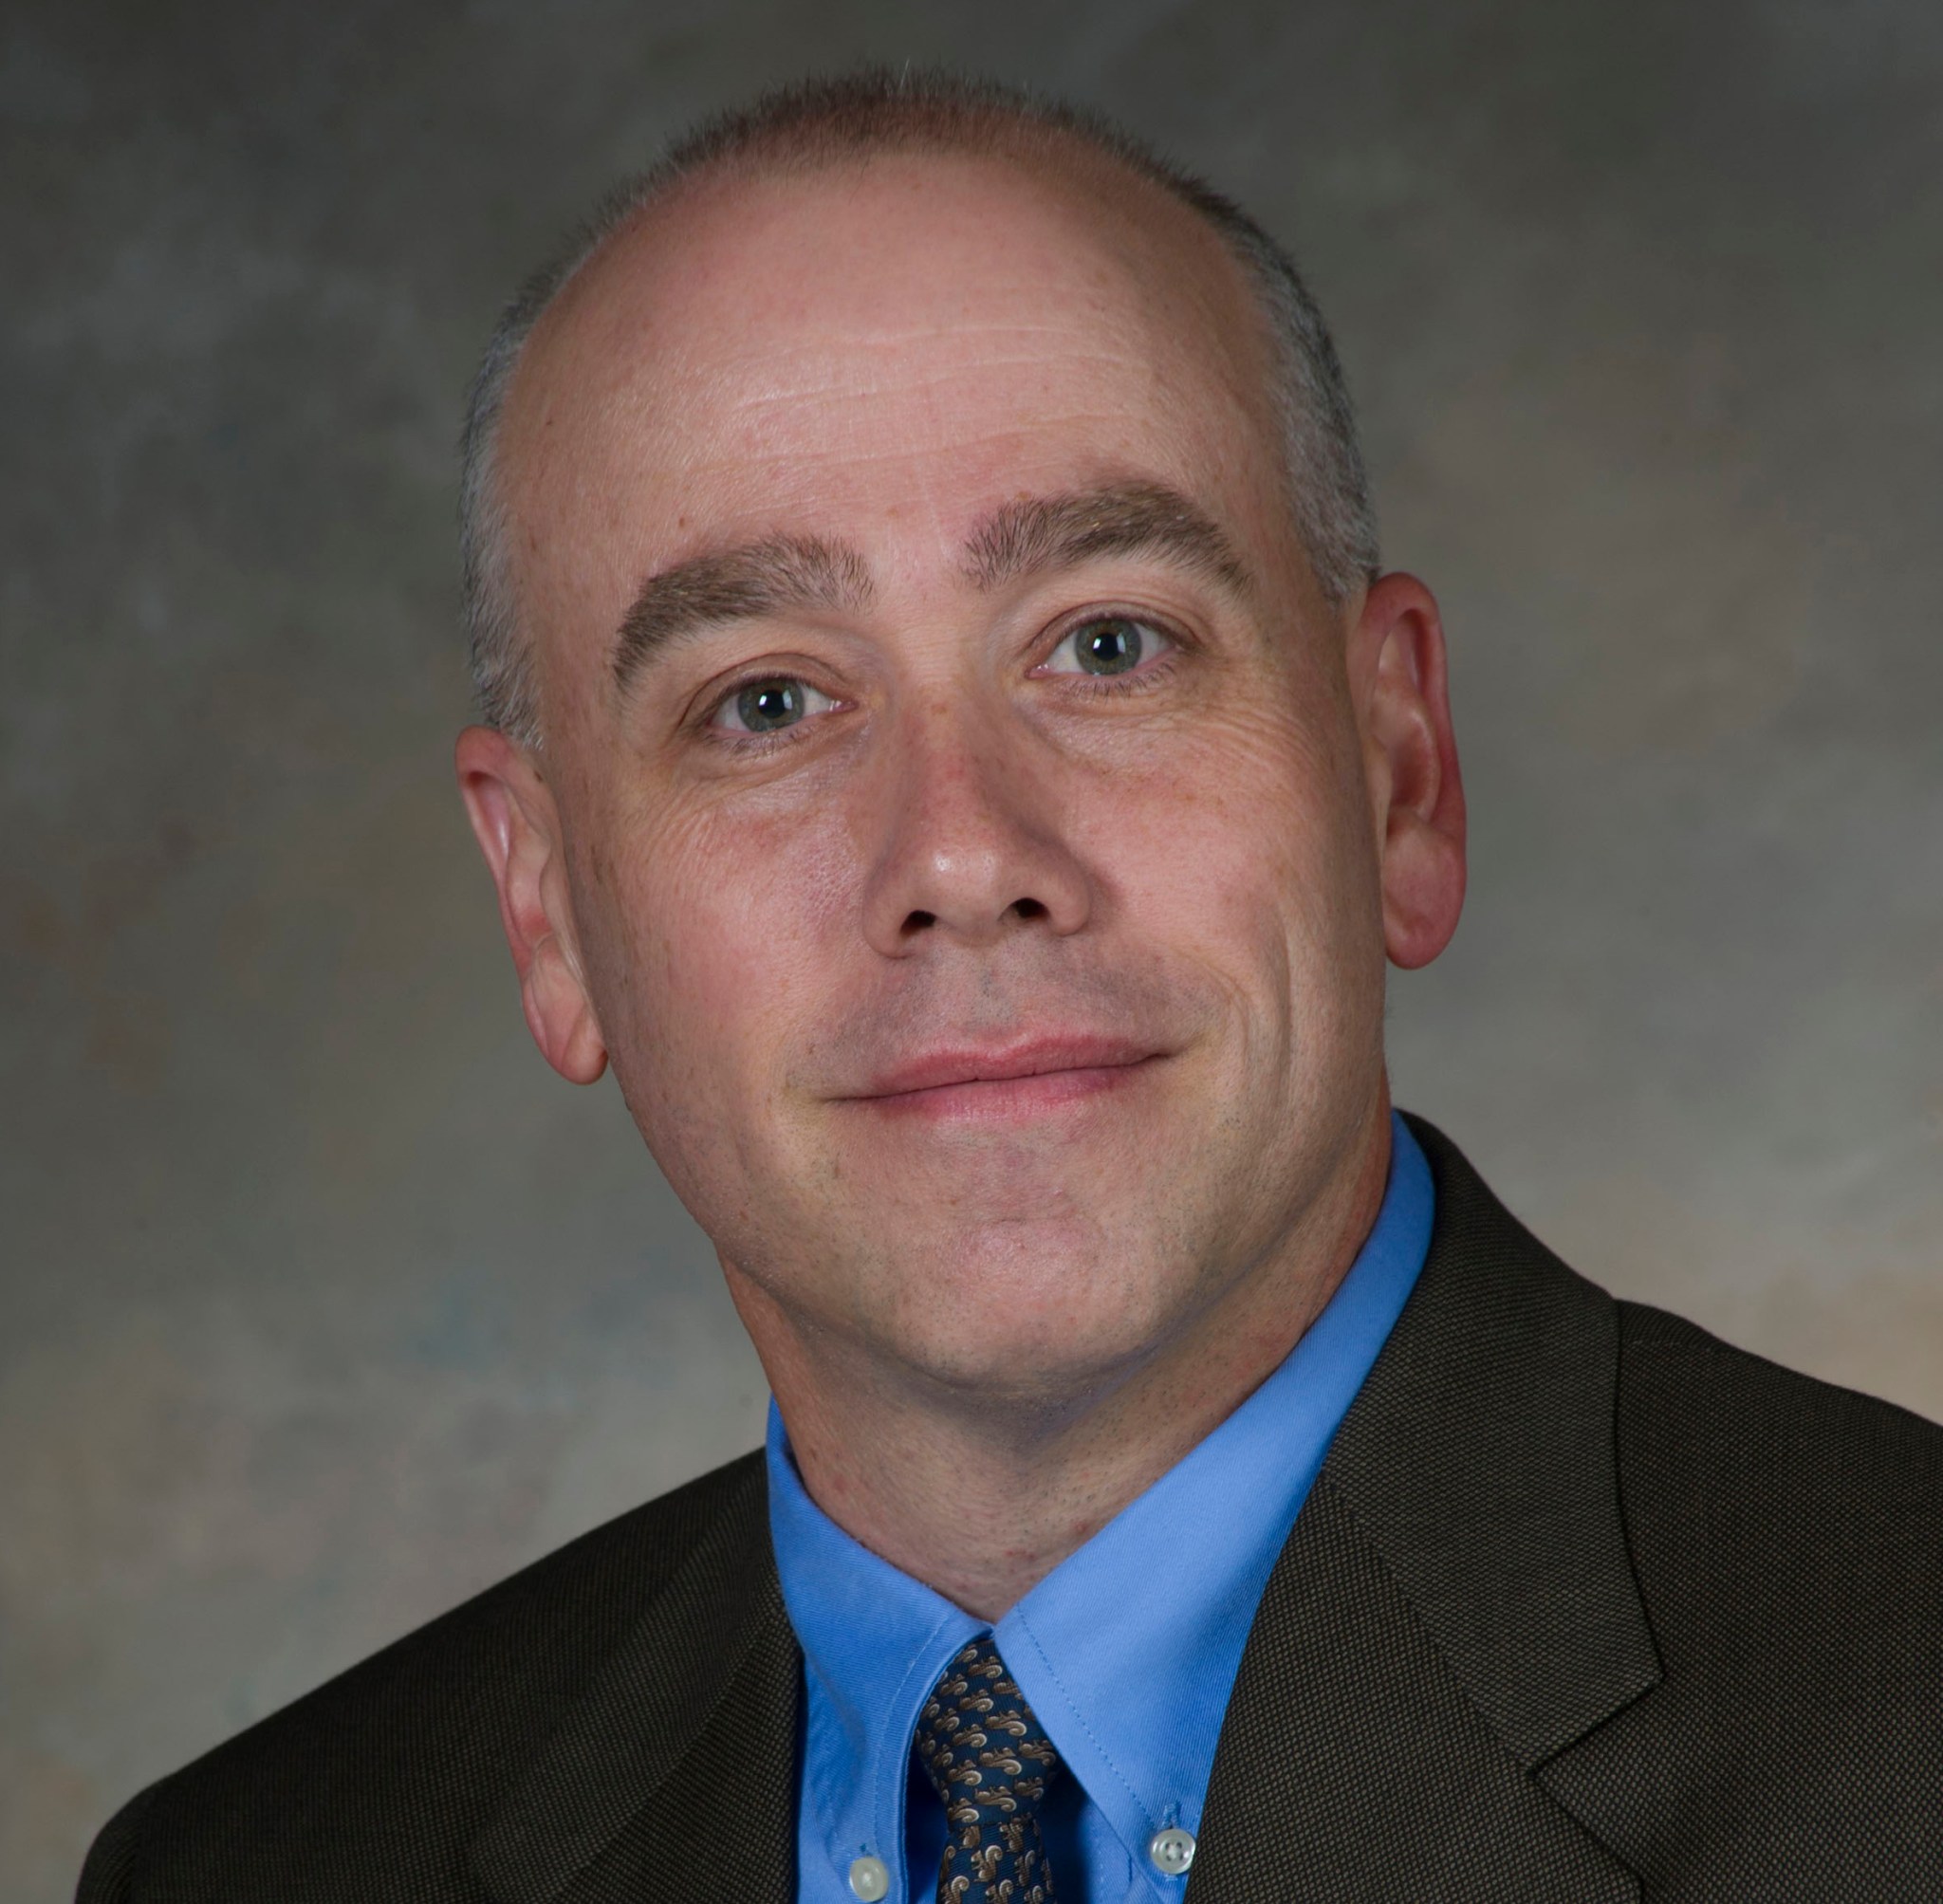 Chad Summers has been named as the director of the Test Laboratory for the Engineering Directorate at NASA's Marshall Space Flight Center, effective April 21.